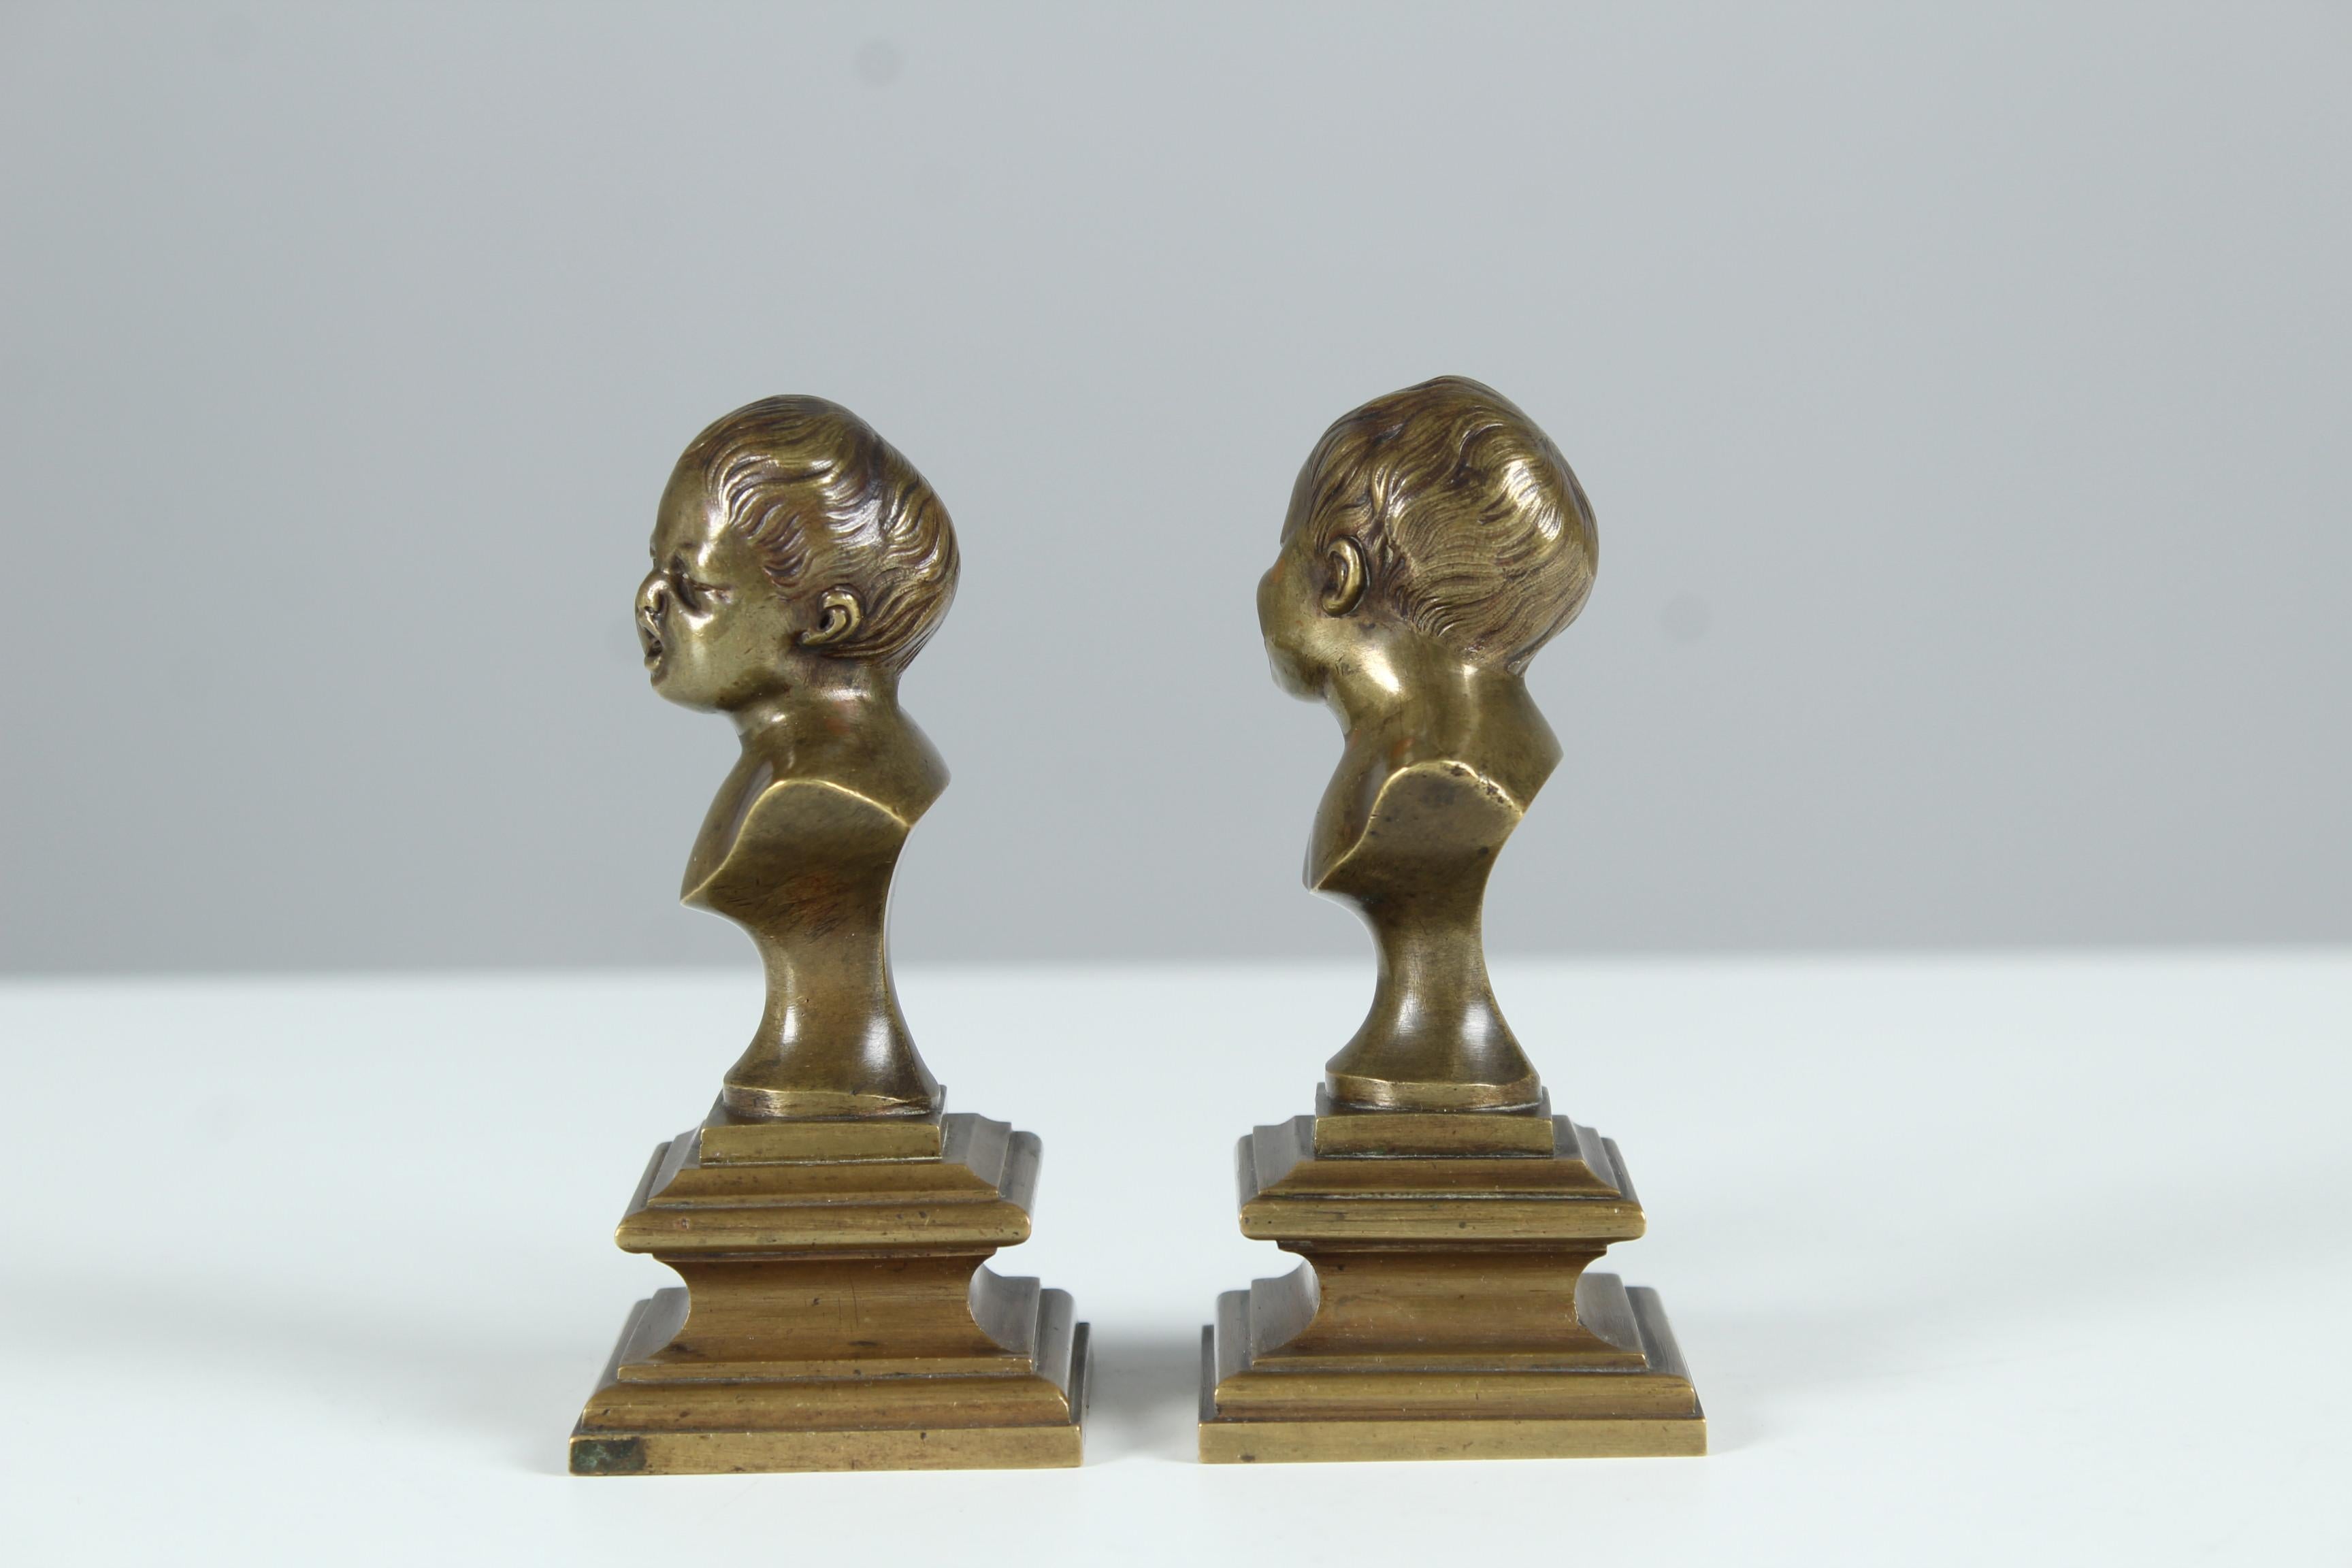 Antique Pair of Miniature Bronze Busts, Children Laughing and Crying, Late 19th In Good Condition For Sale In Greven, DE